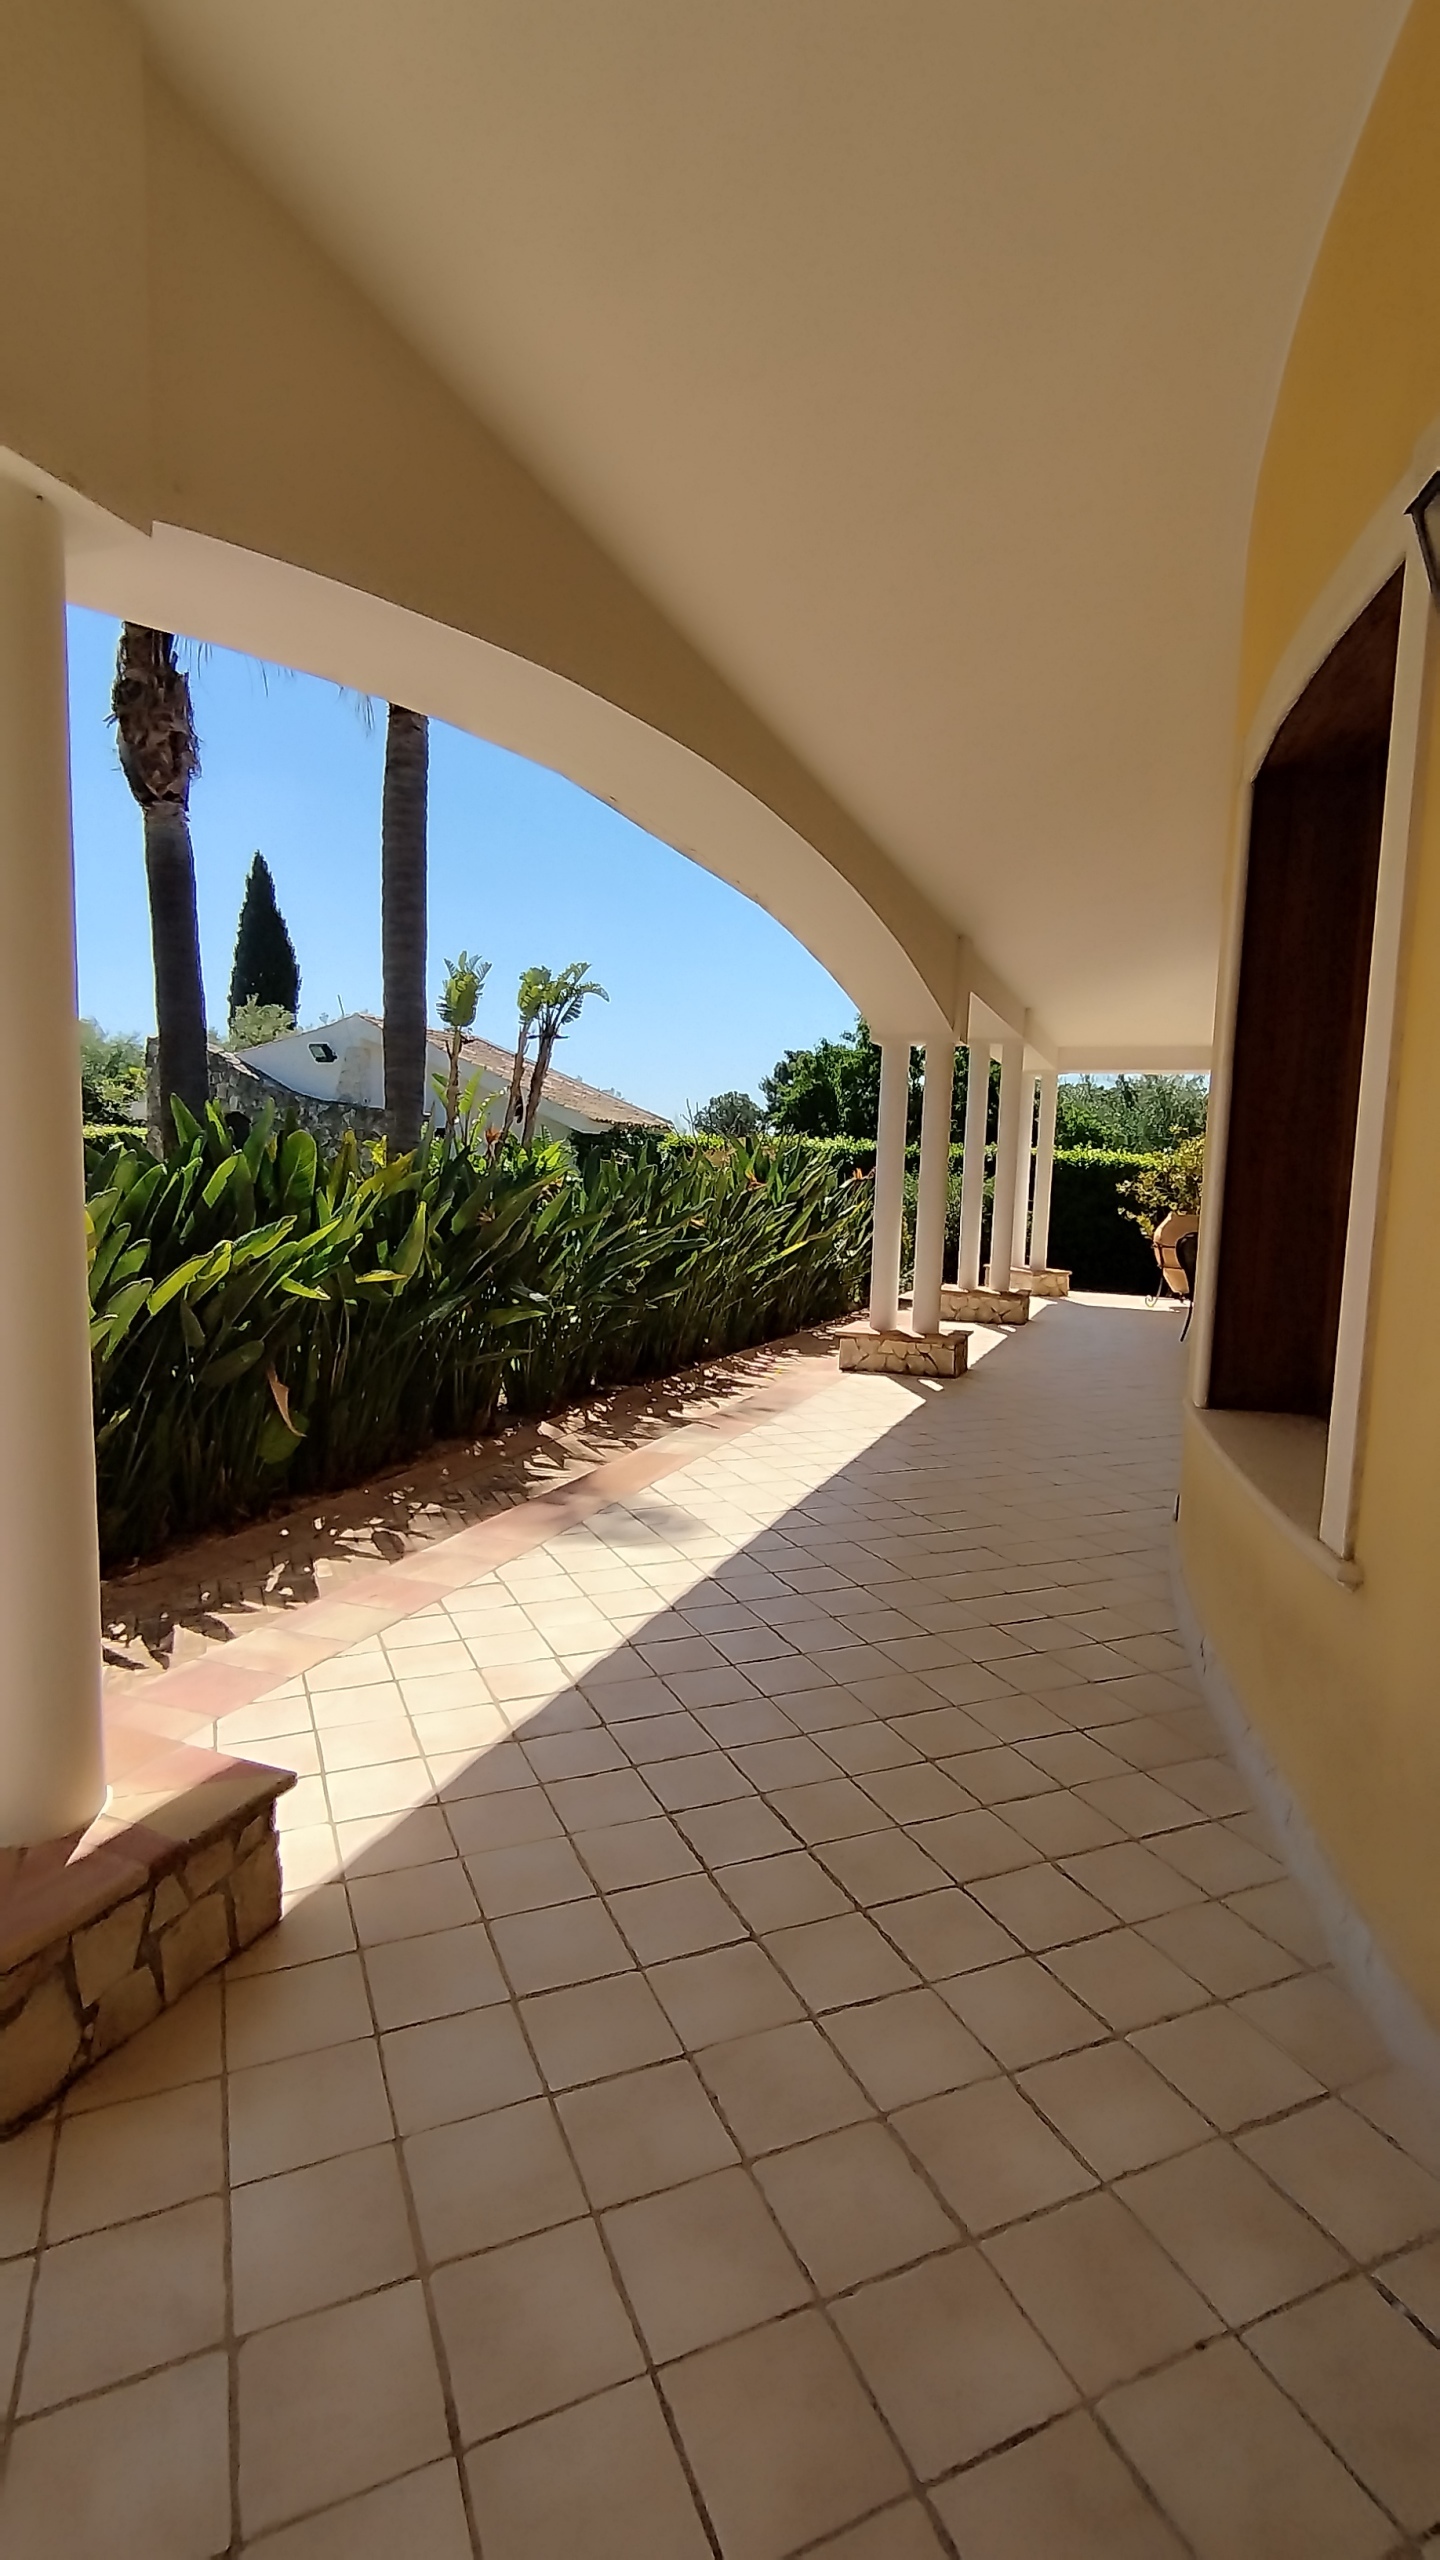 For sale Prestigious villa with swimming pool in Syracuse ideal for important residence.